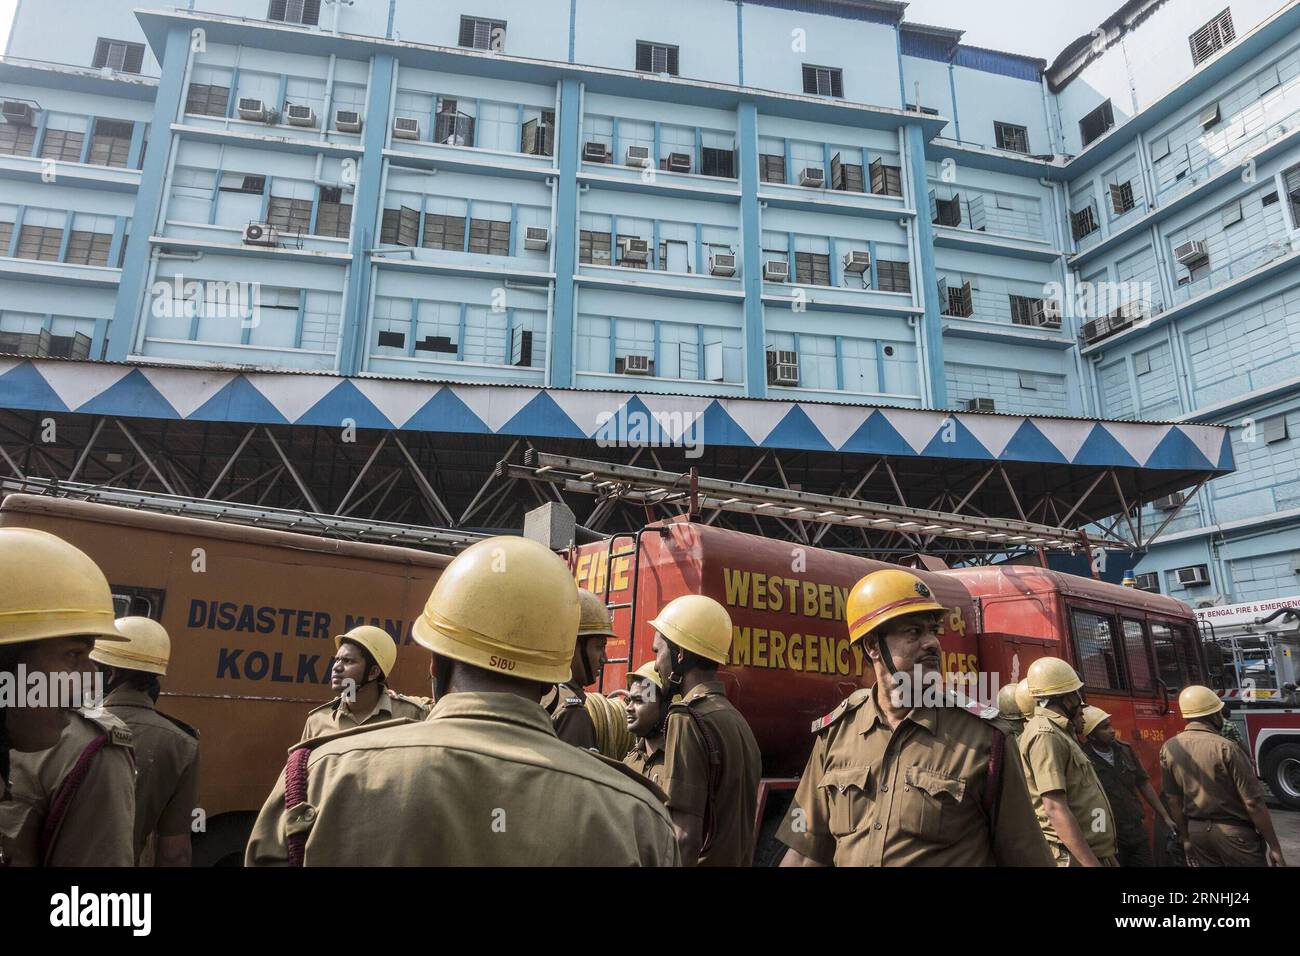 Bilder des Tages Brand in Krankenhaus in Kalkutta (161121) -- KOLKATA, Nov. 21, 2016 -- Indian fire fighters work near SSKM Hospital in Kolkata, capital of Indian state West Bengal, Nov. 21, 2016. A fire broke out in Kolkata on Monday. Fire brigade sources said at least sixteen fire engines were pressed in to douse the fire and some patients were shifted. There were no reports of casualties yet. ) (wtc) INDIA-KOLKATA-SSKM HOSPITAL-FIRE TumpaxMondal PUBLICATIONxNOTxINxCHN   Images the Day Brand in Hospital in Calcutta  Kolkata Nov 21 2016 Indian Fire Fighters Work Near SSKM Hospital in Kolkata Stock Photo